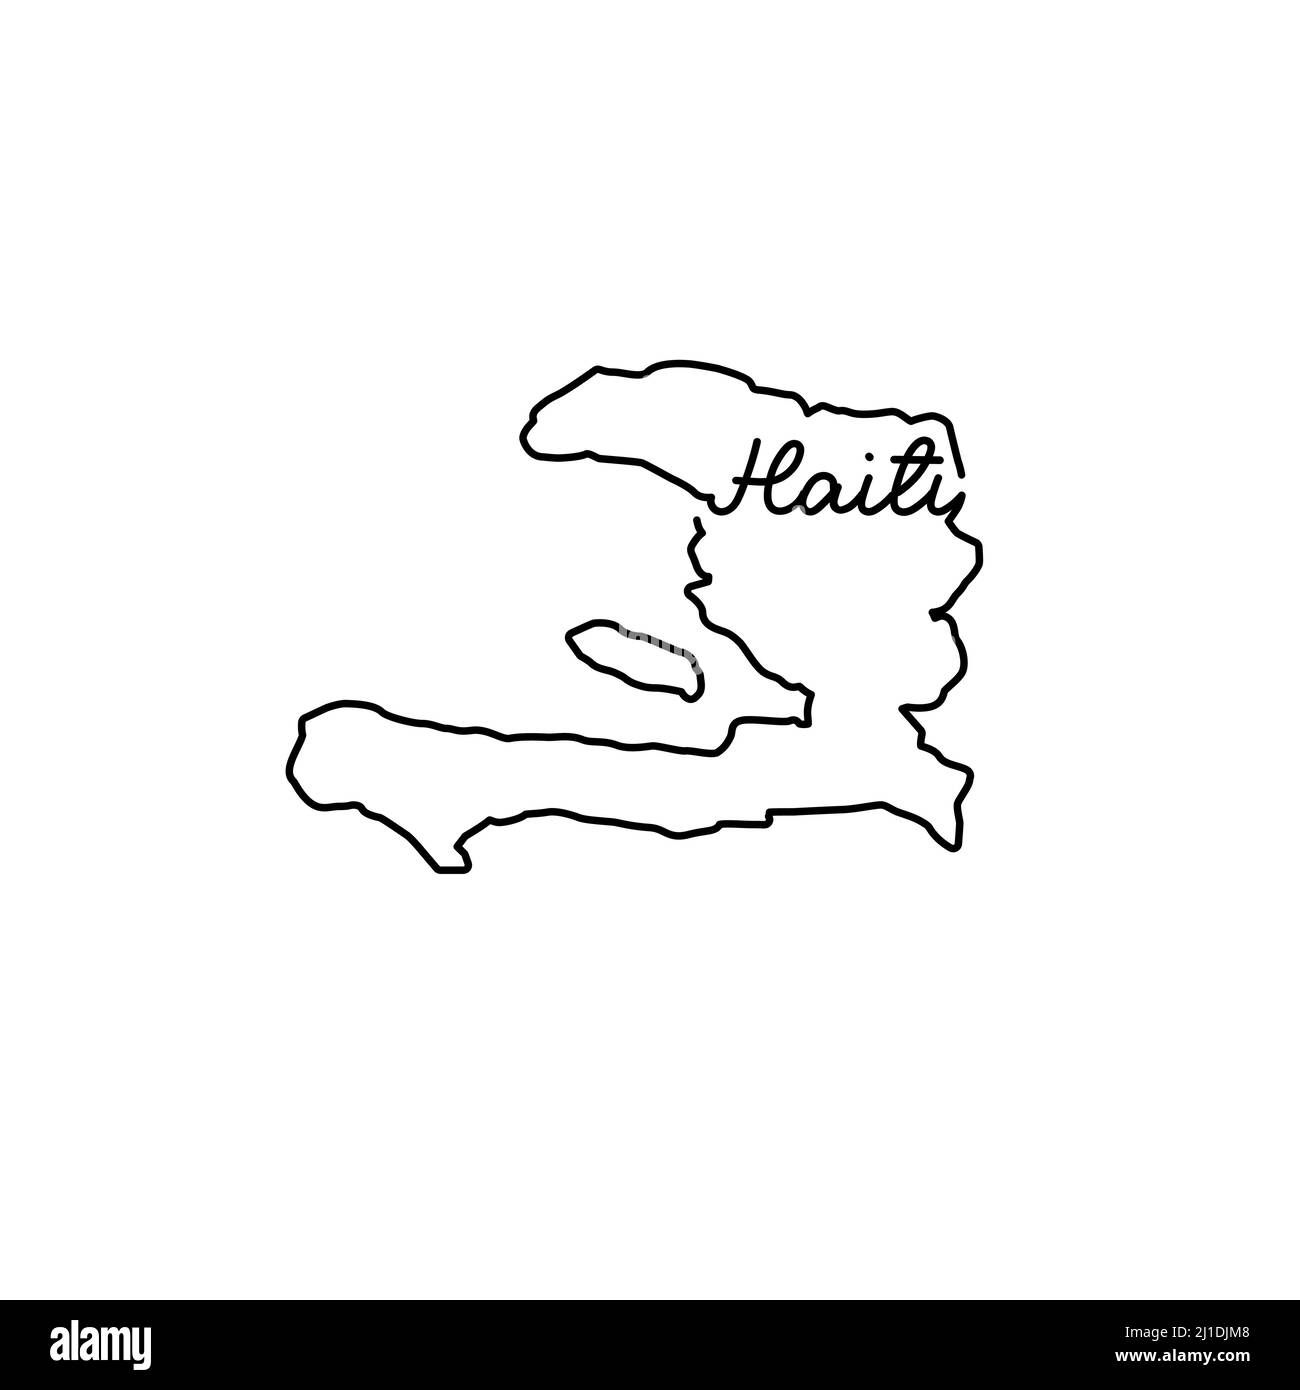 Haiti outline map with the handwritten country name. Continuous line drawing of patriotic home sign. A love for a small homeland. T-shirt print idea. Stock Vector